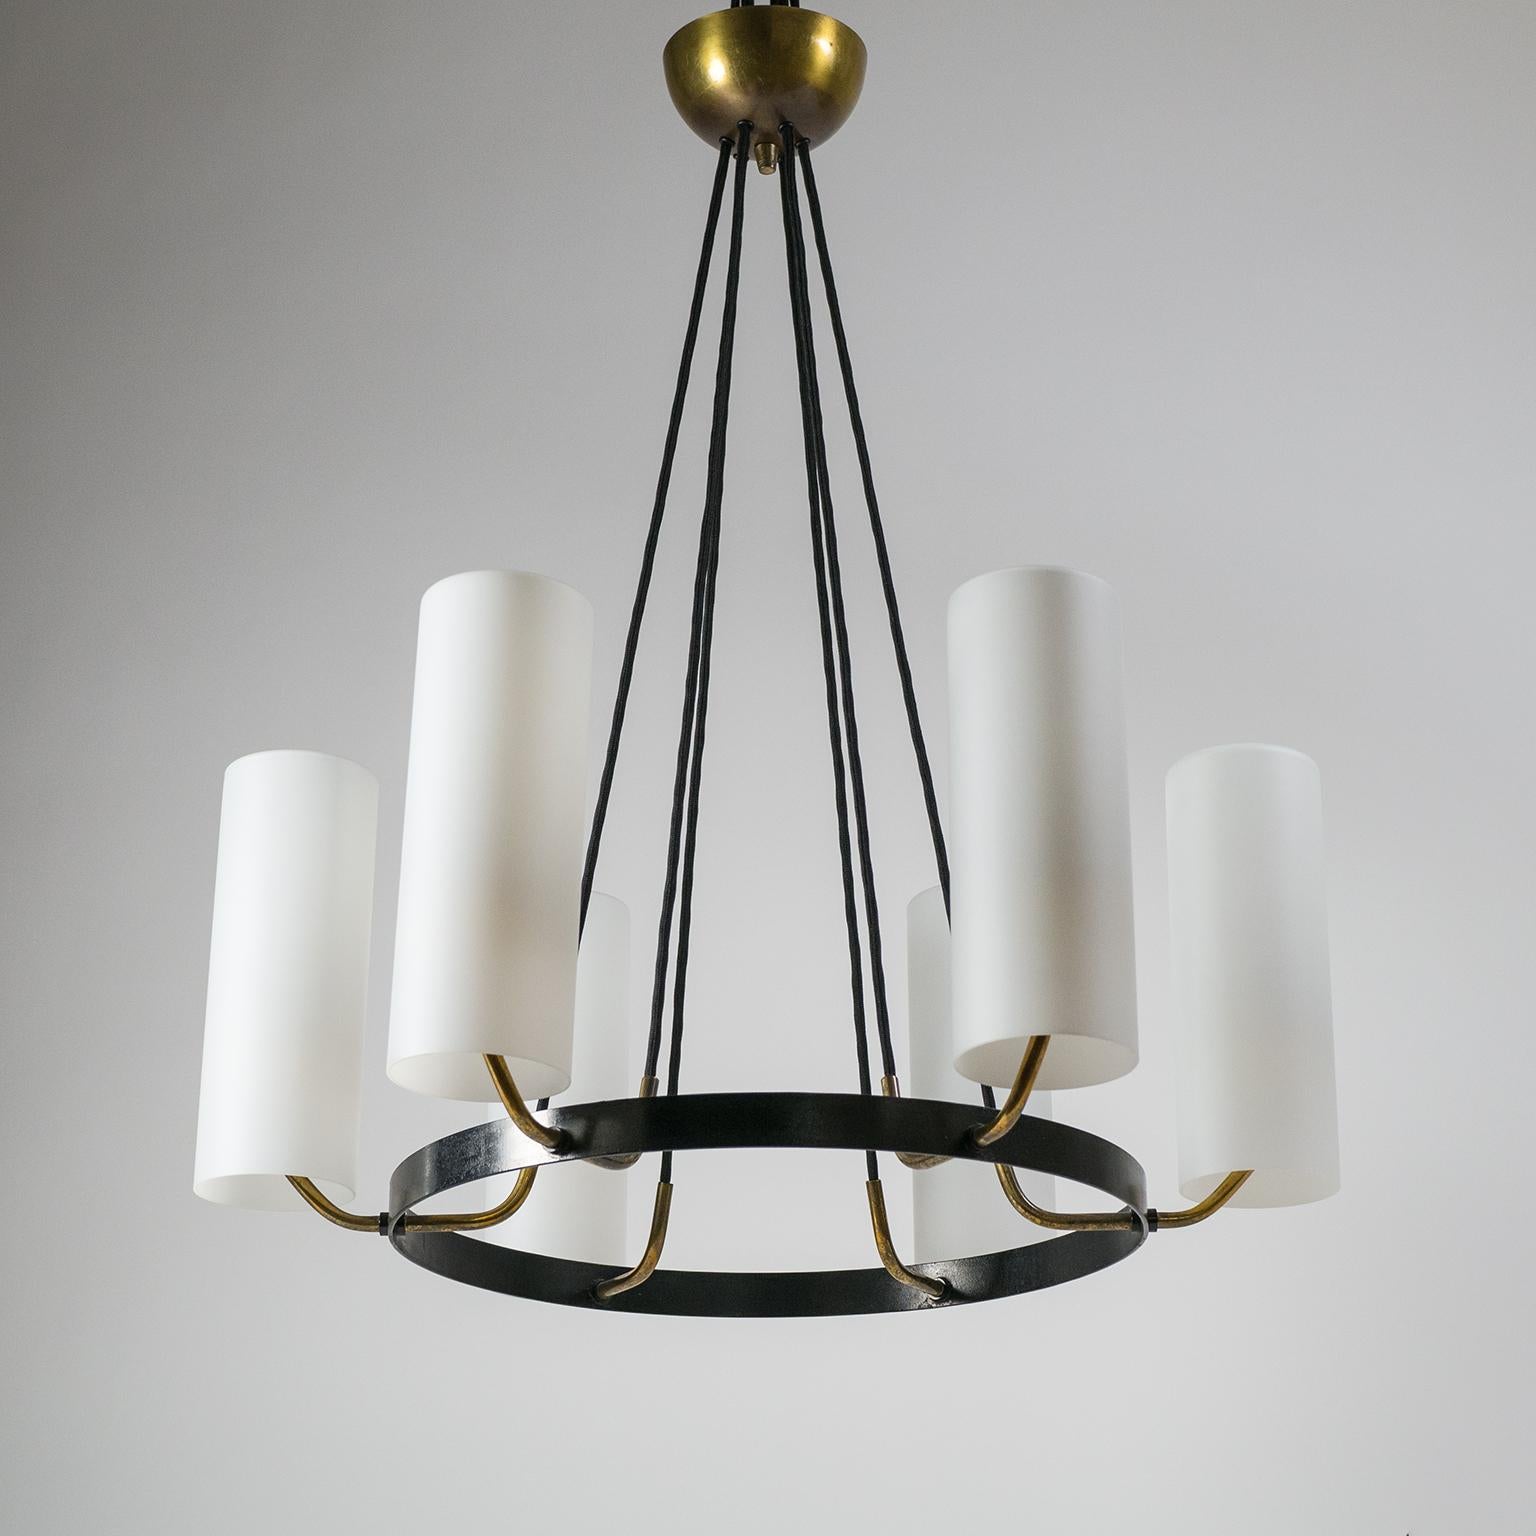 Very fine modernist chandelier from the 1950s. Lovely combination of volume (due to the large glass diffusers) with a very light-weight Minimalist design. Six large cased satin glass diffusers appear to be floating atop brass arms attached to a